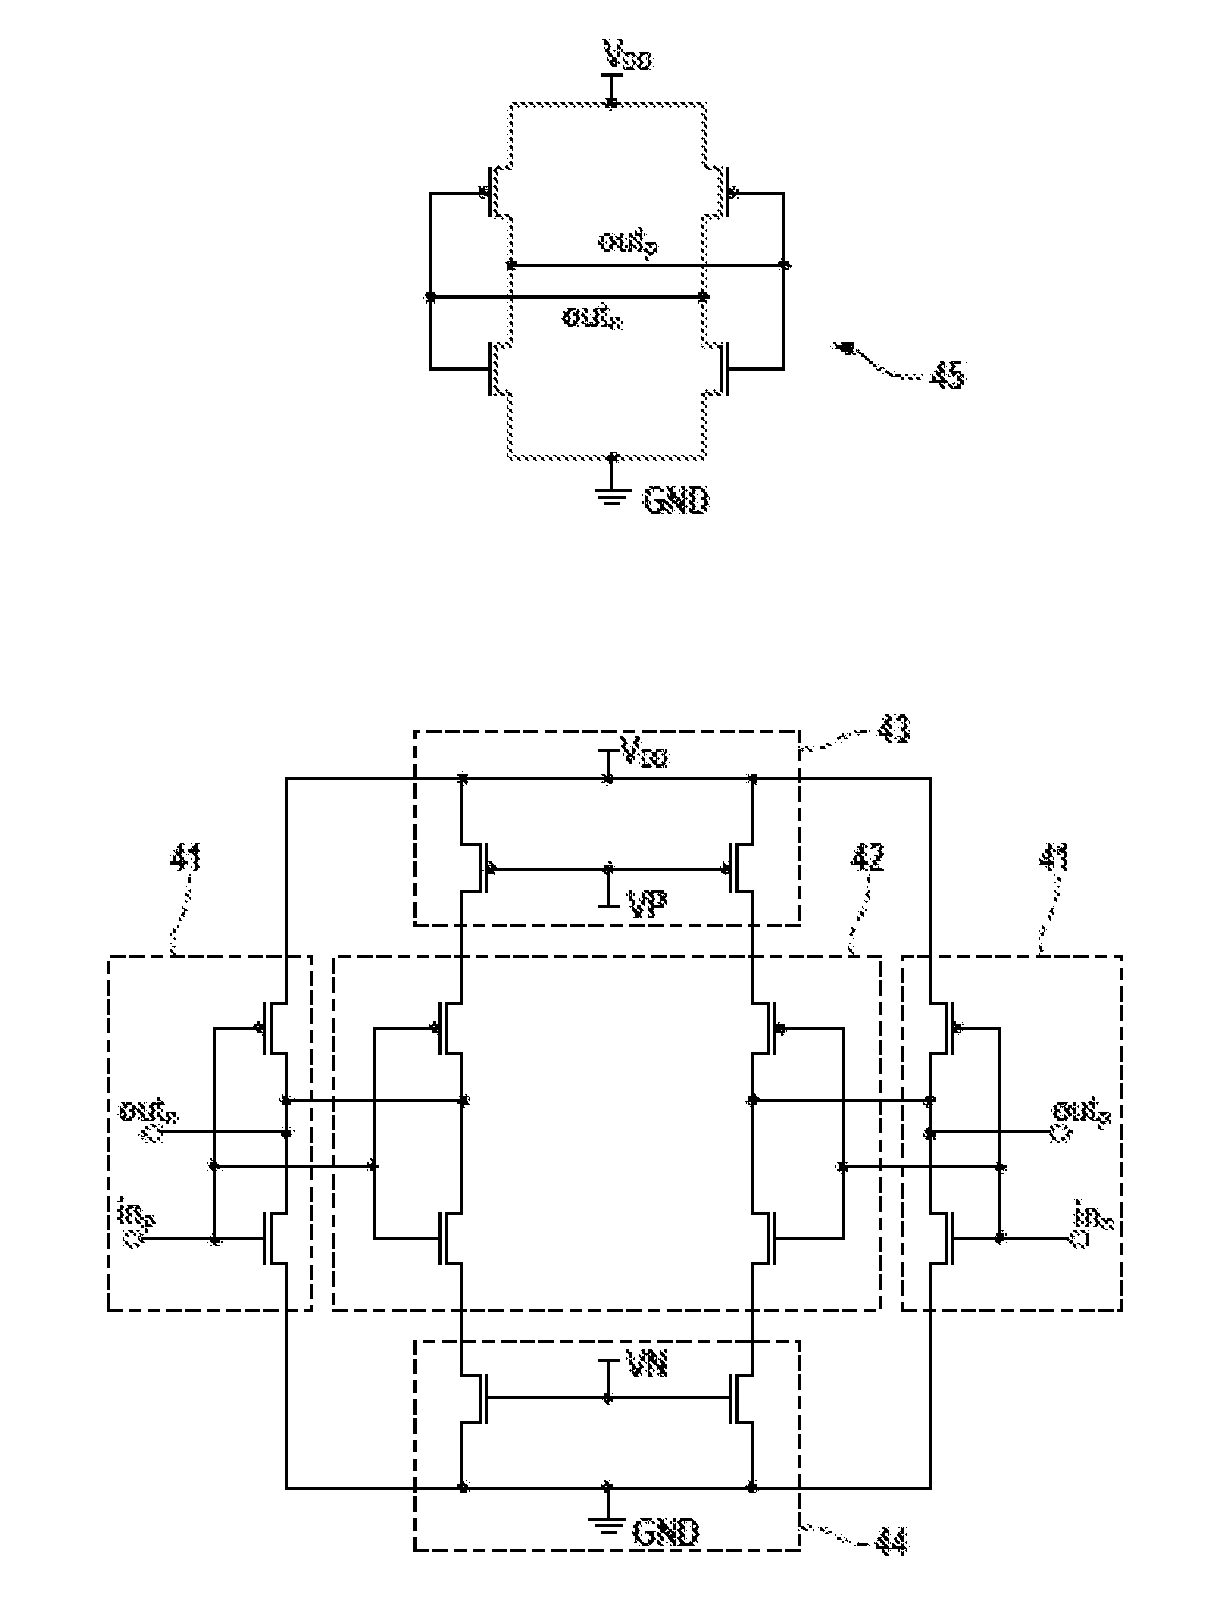 Voltage-controlled ring oscillator with delay line